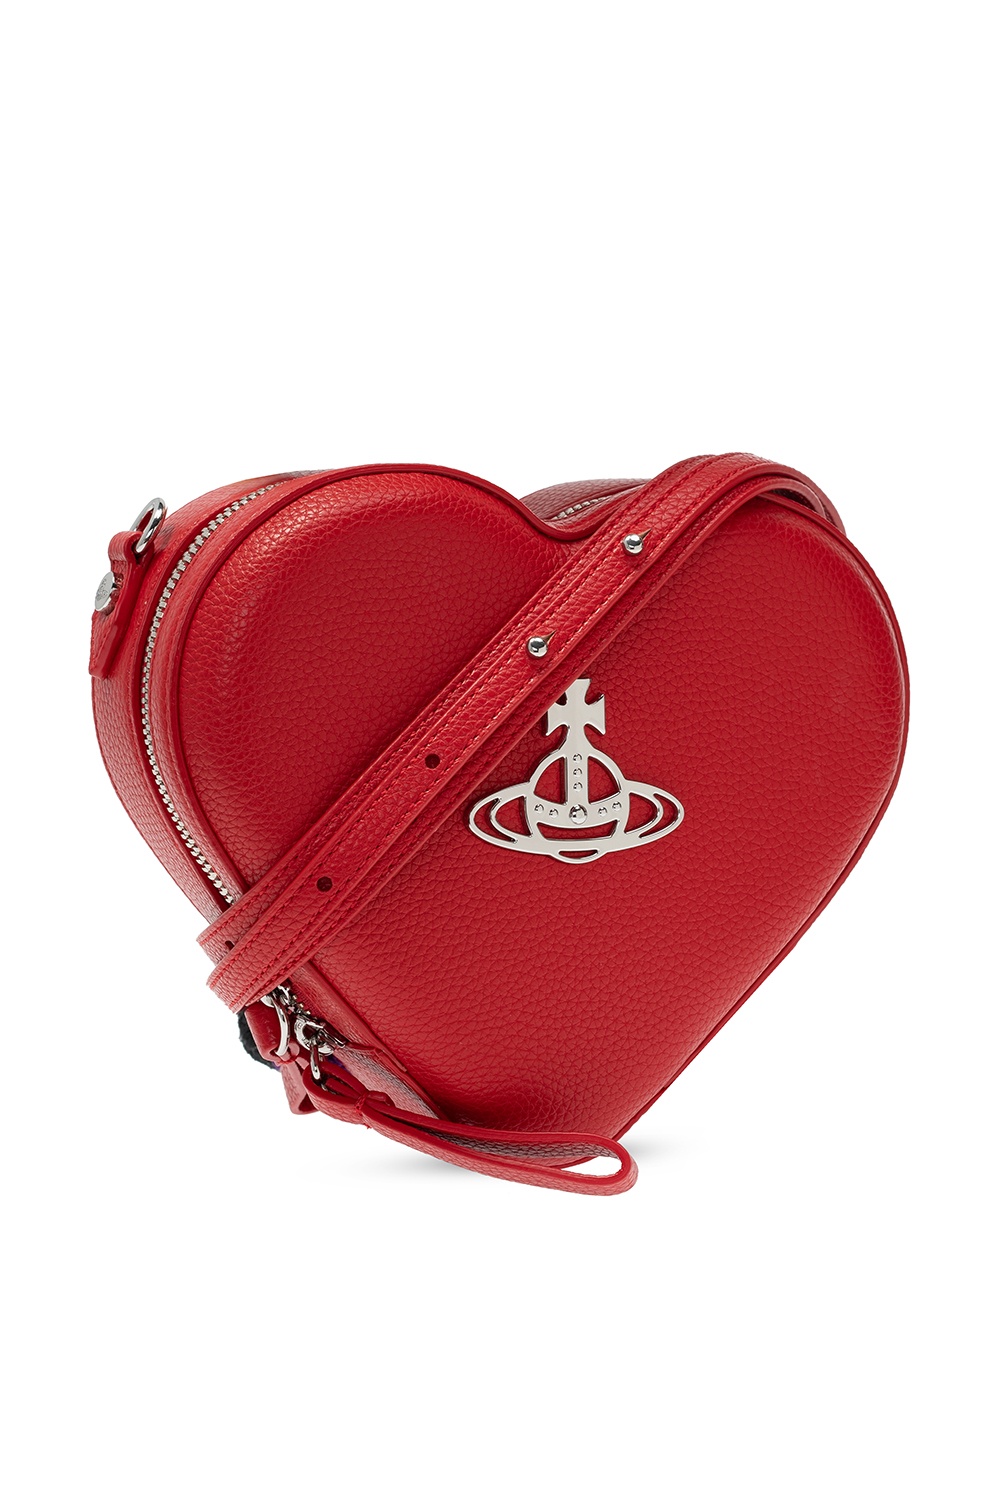 VIVIENNE WESTWOOD LOUISE HEART CROSSBODY BAG RED SILVER PARLOUR X